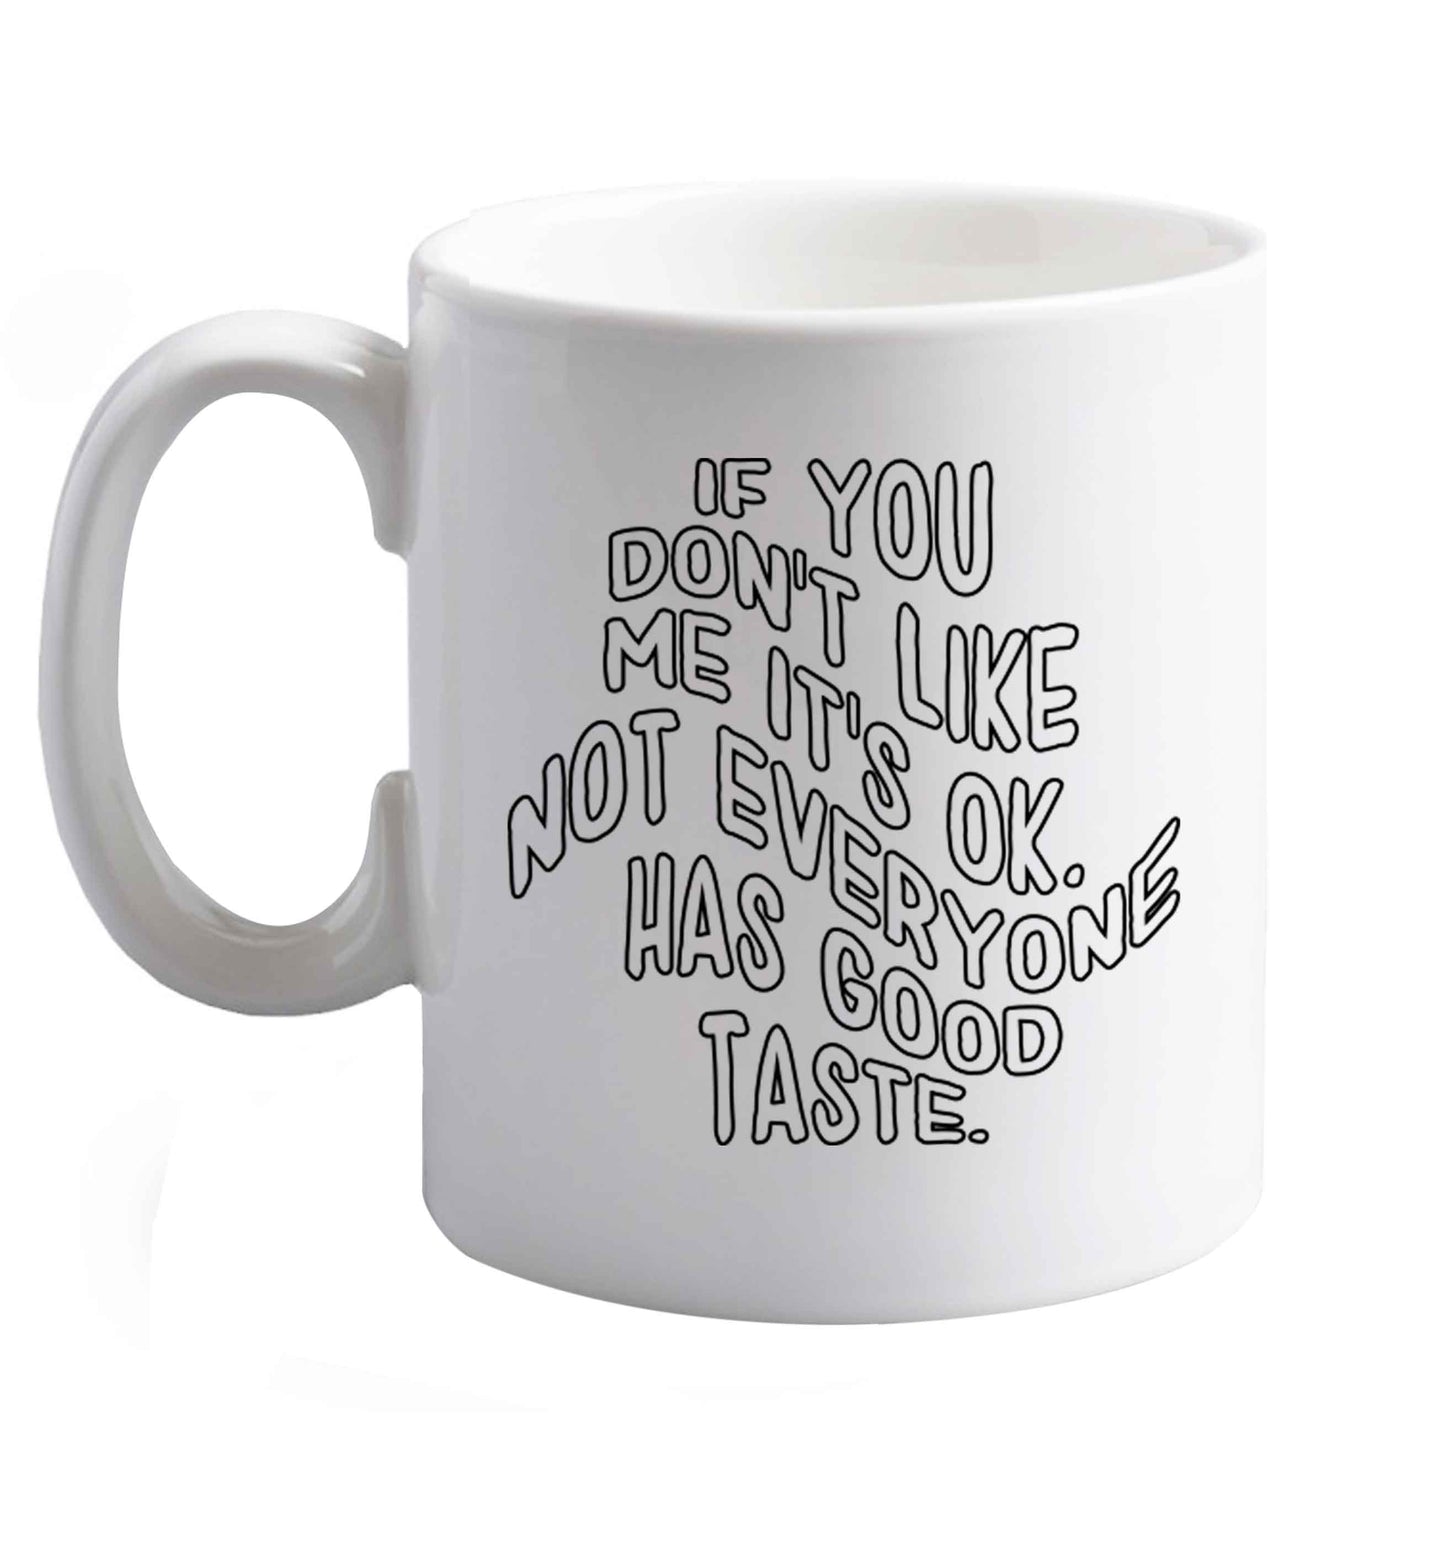 10 oz If you don't like me it's ok not everyone has good taste  ceramic mug right handed